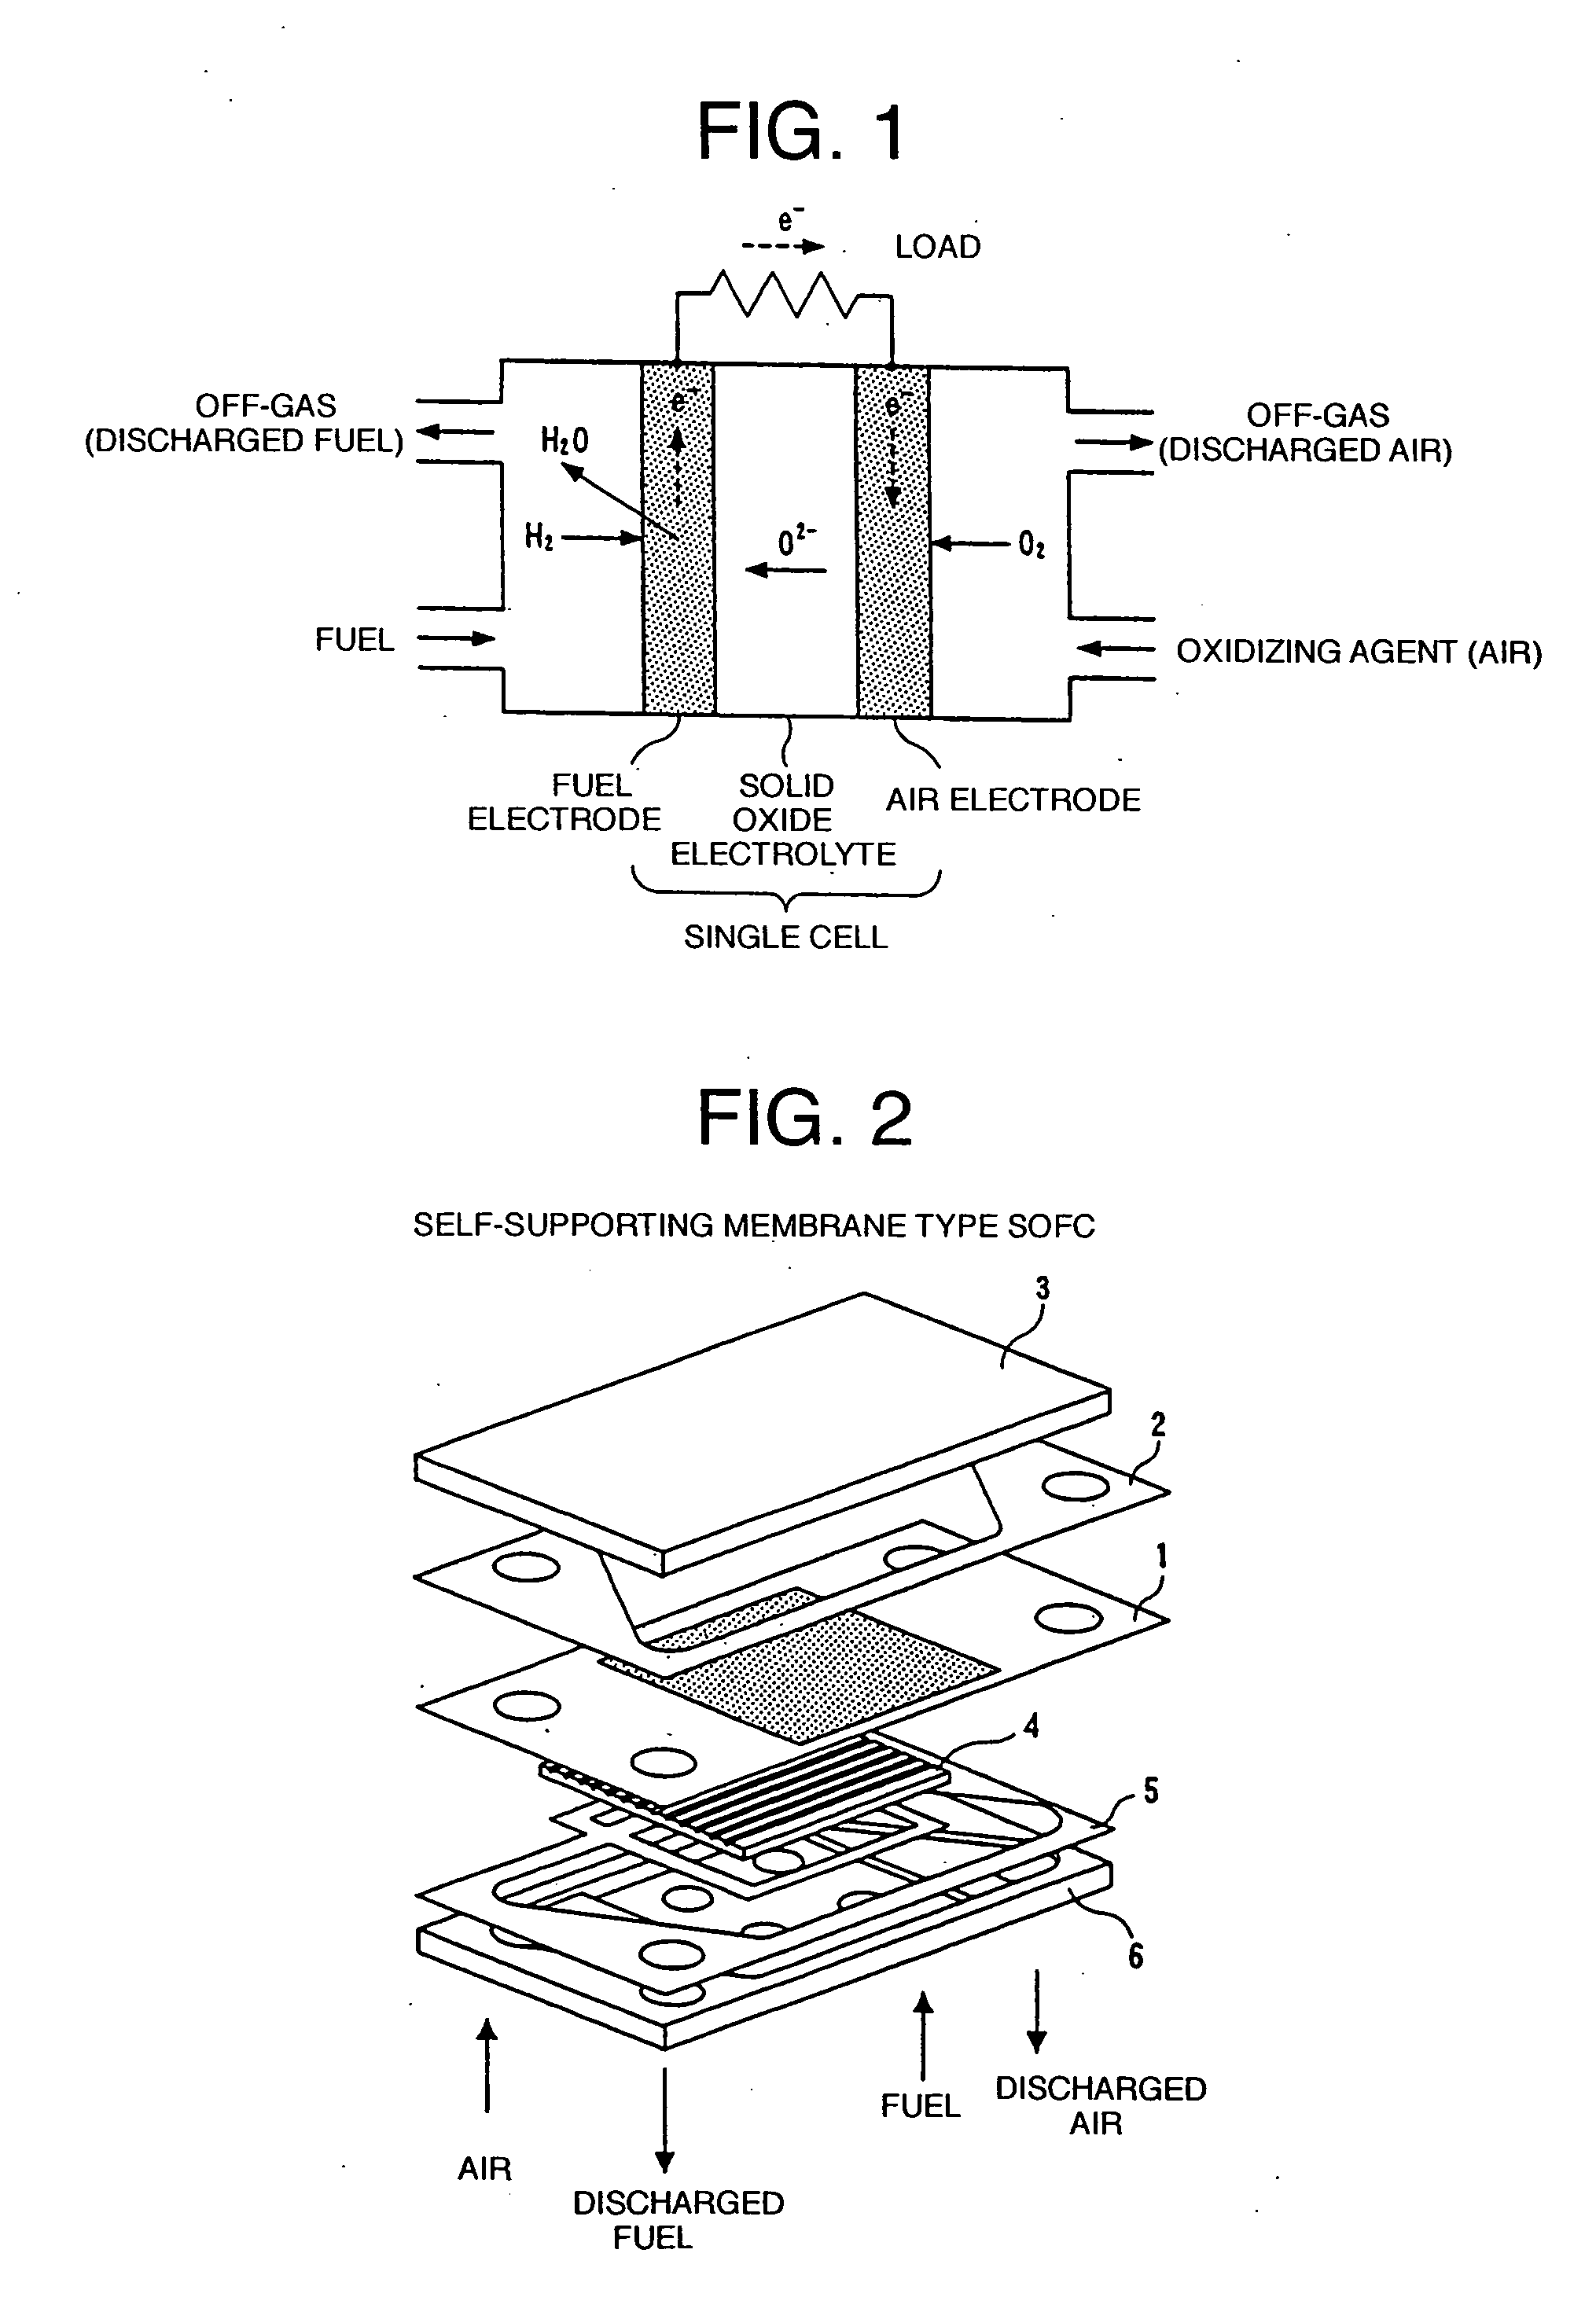 Solid oxide fuel cell system